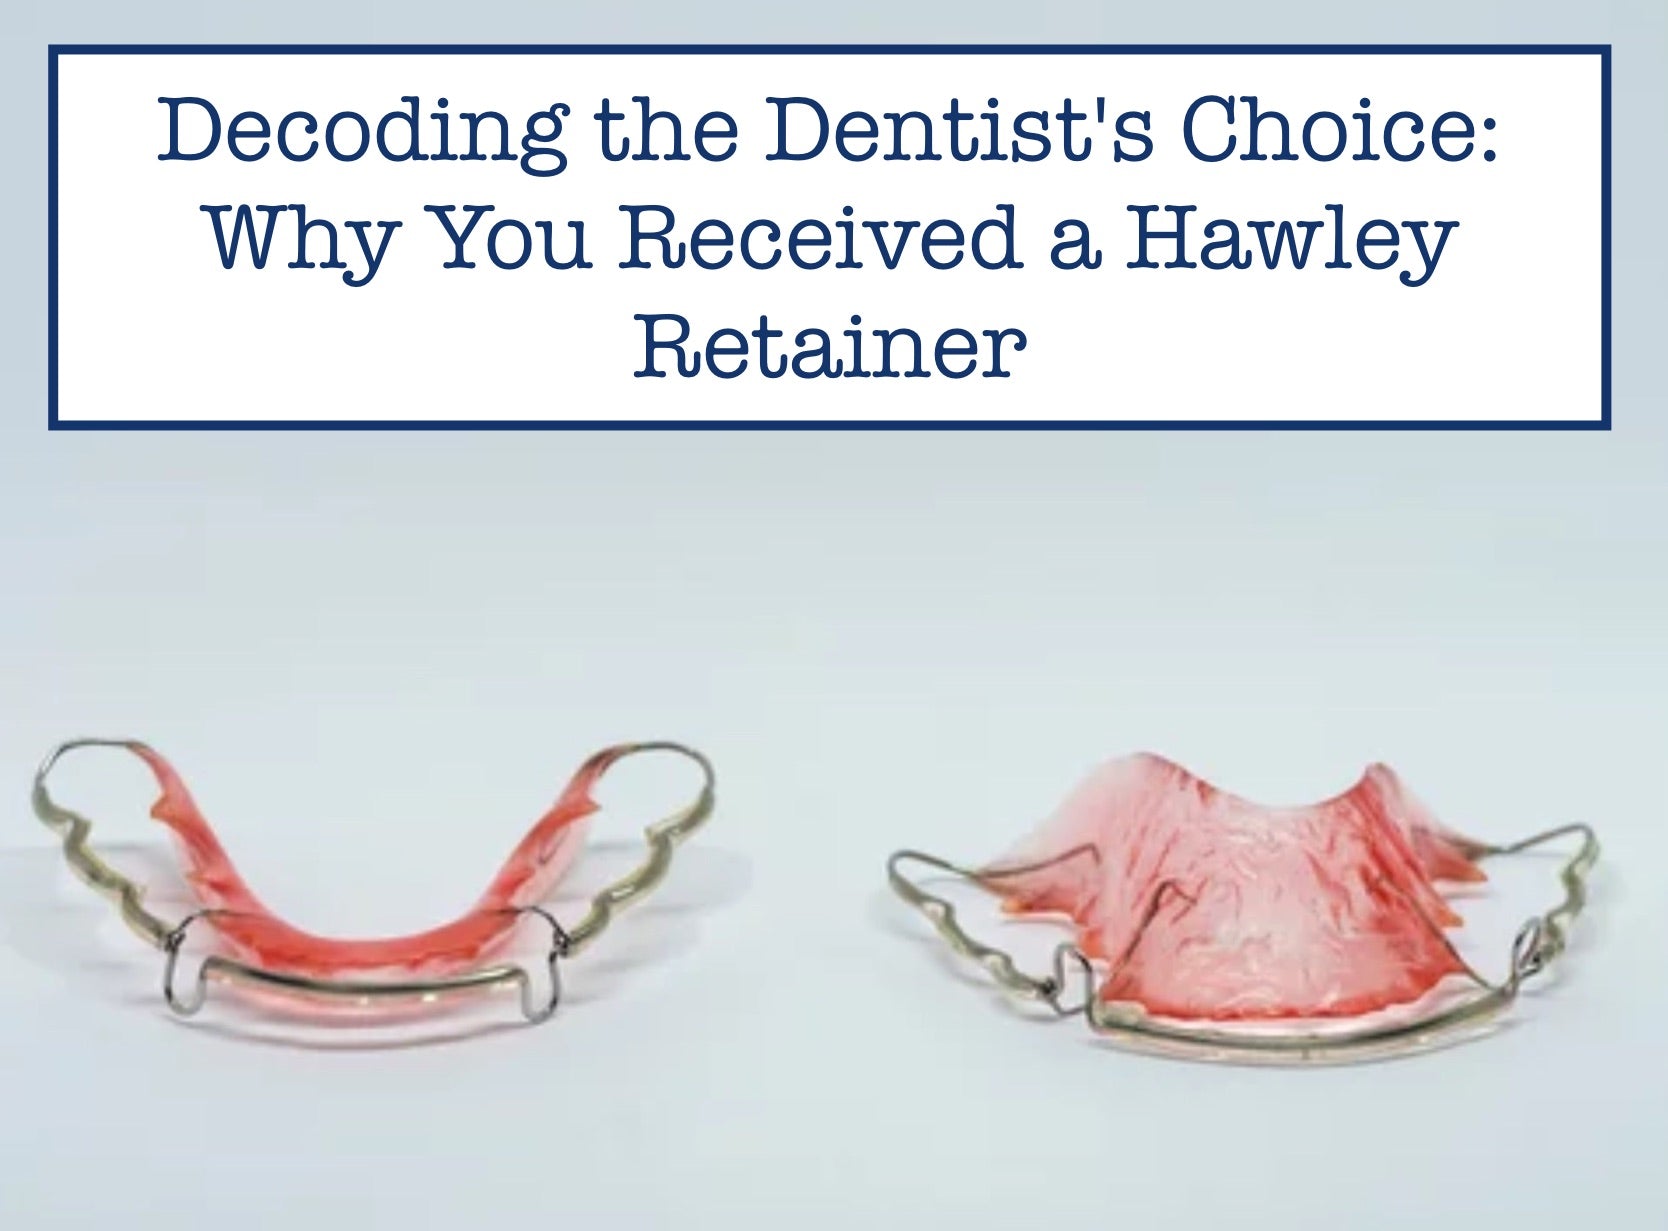 Decoding the Dentist's Choice: Why You Received a Hawley Retainer